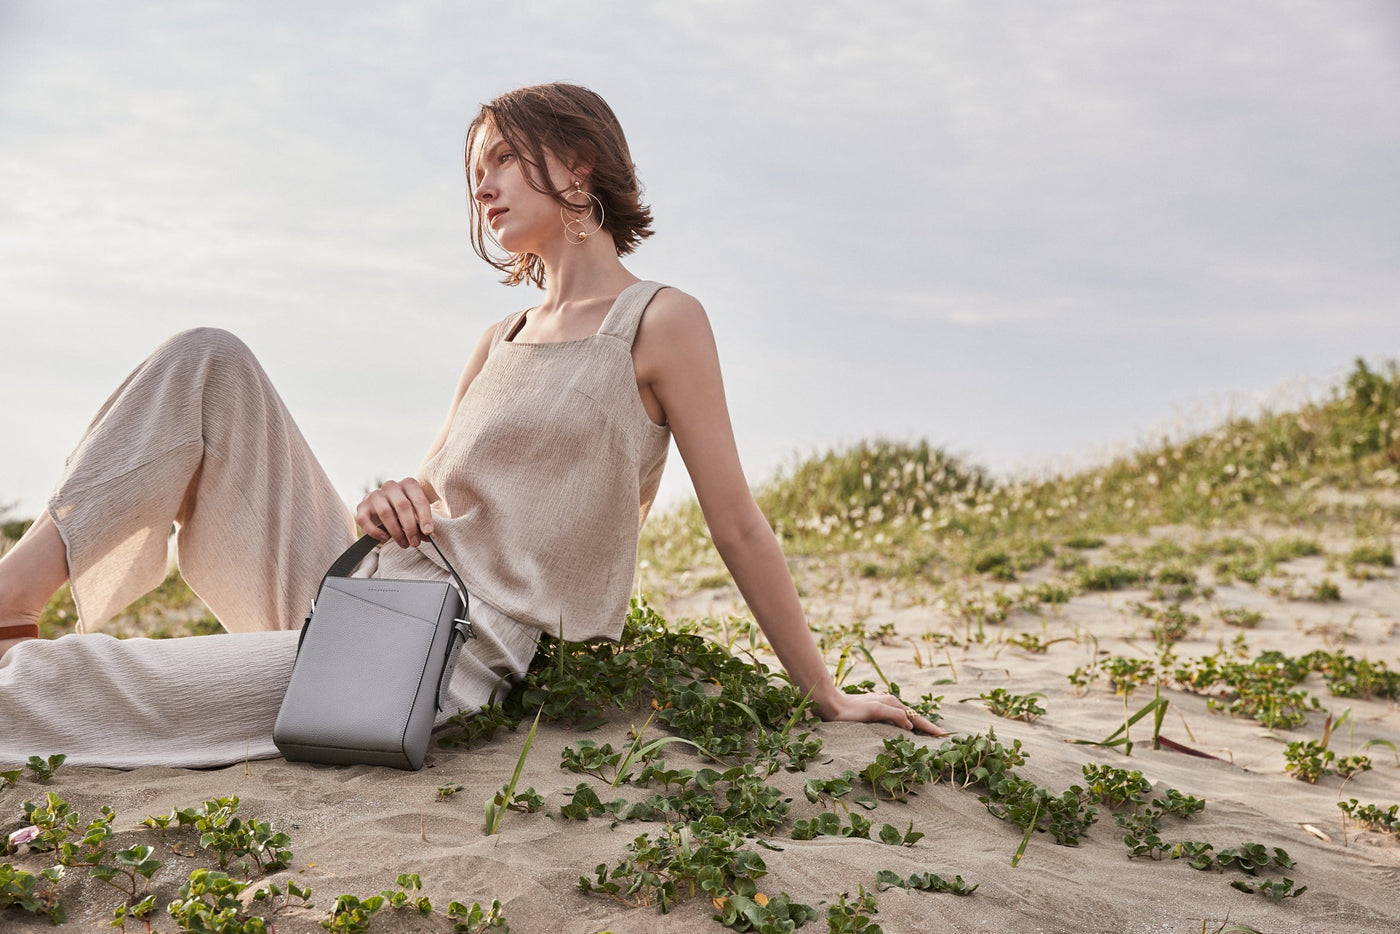 A stylishly dressed, environmentally conscious woman carries a sustainable leather bag from BONAVENTURA on the beach.